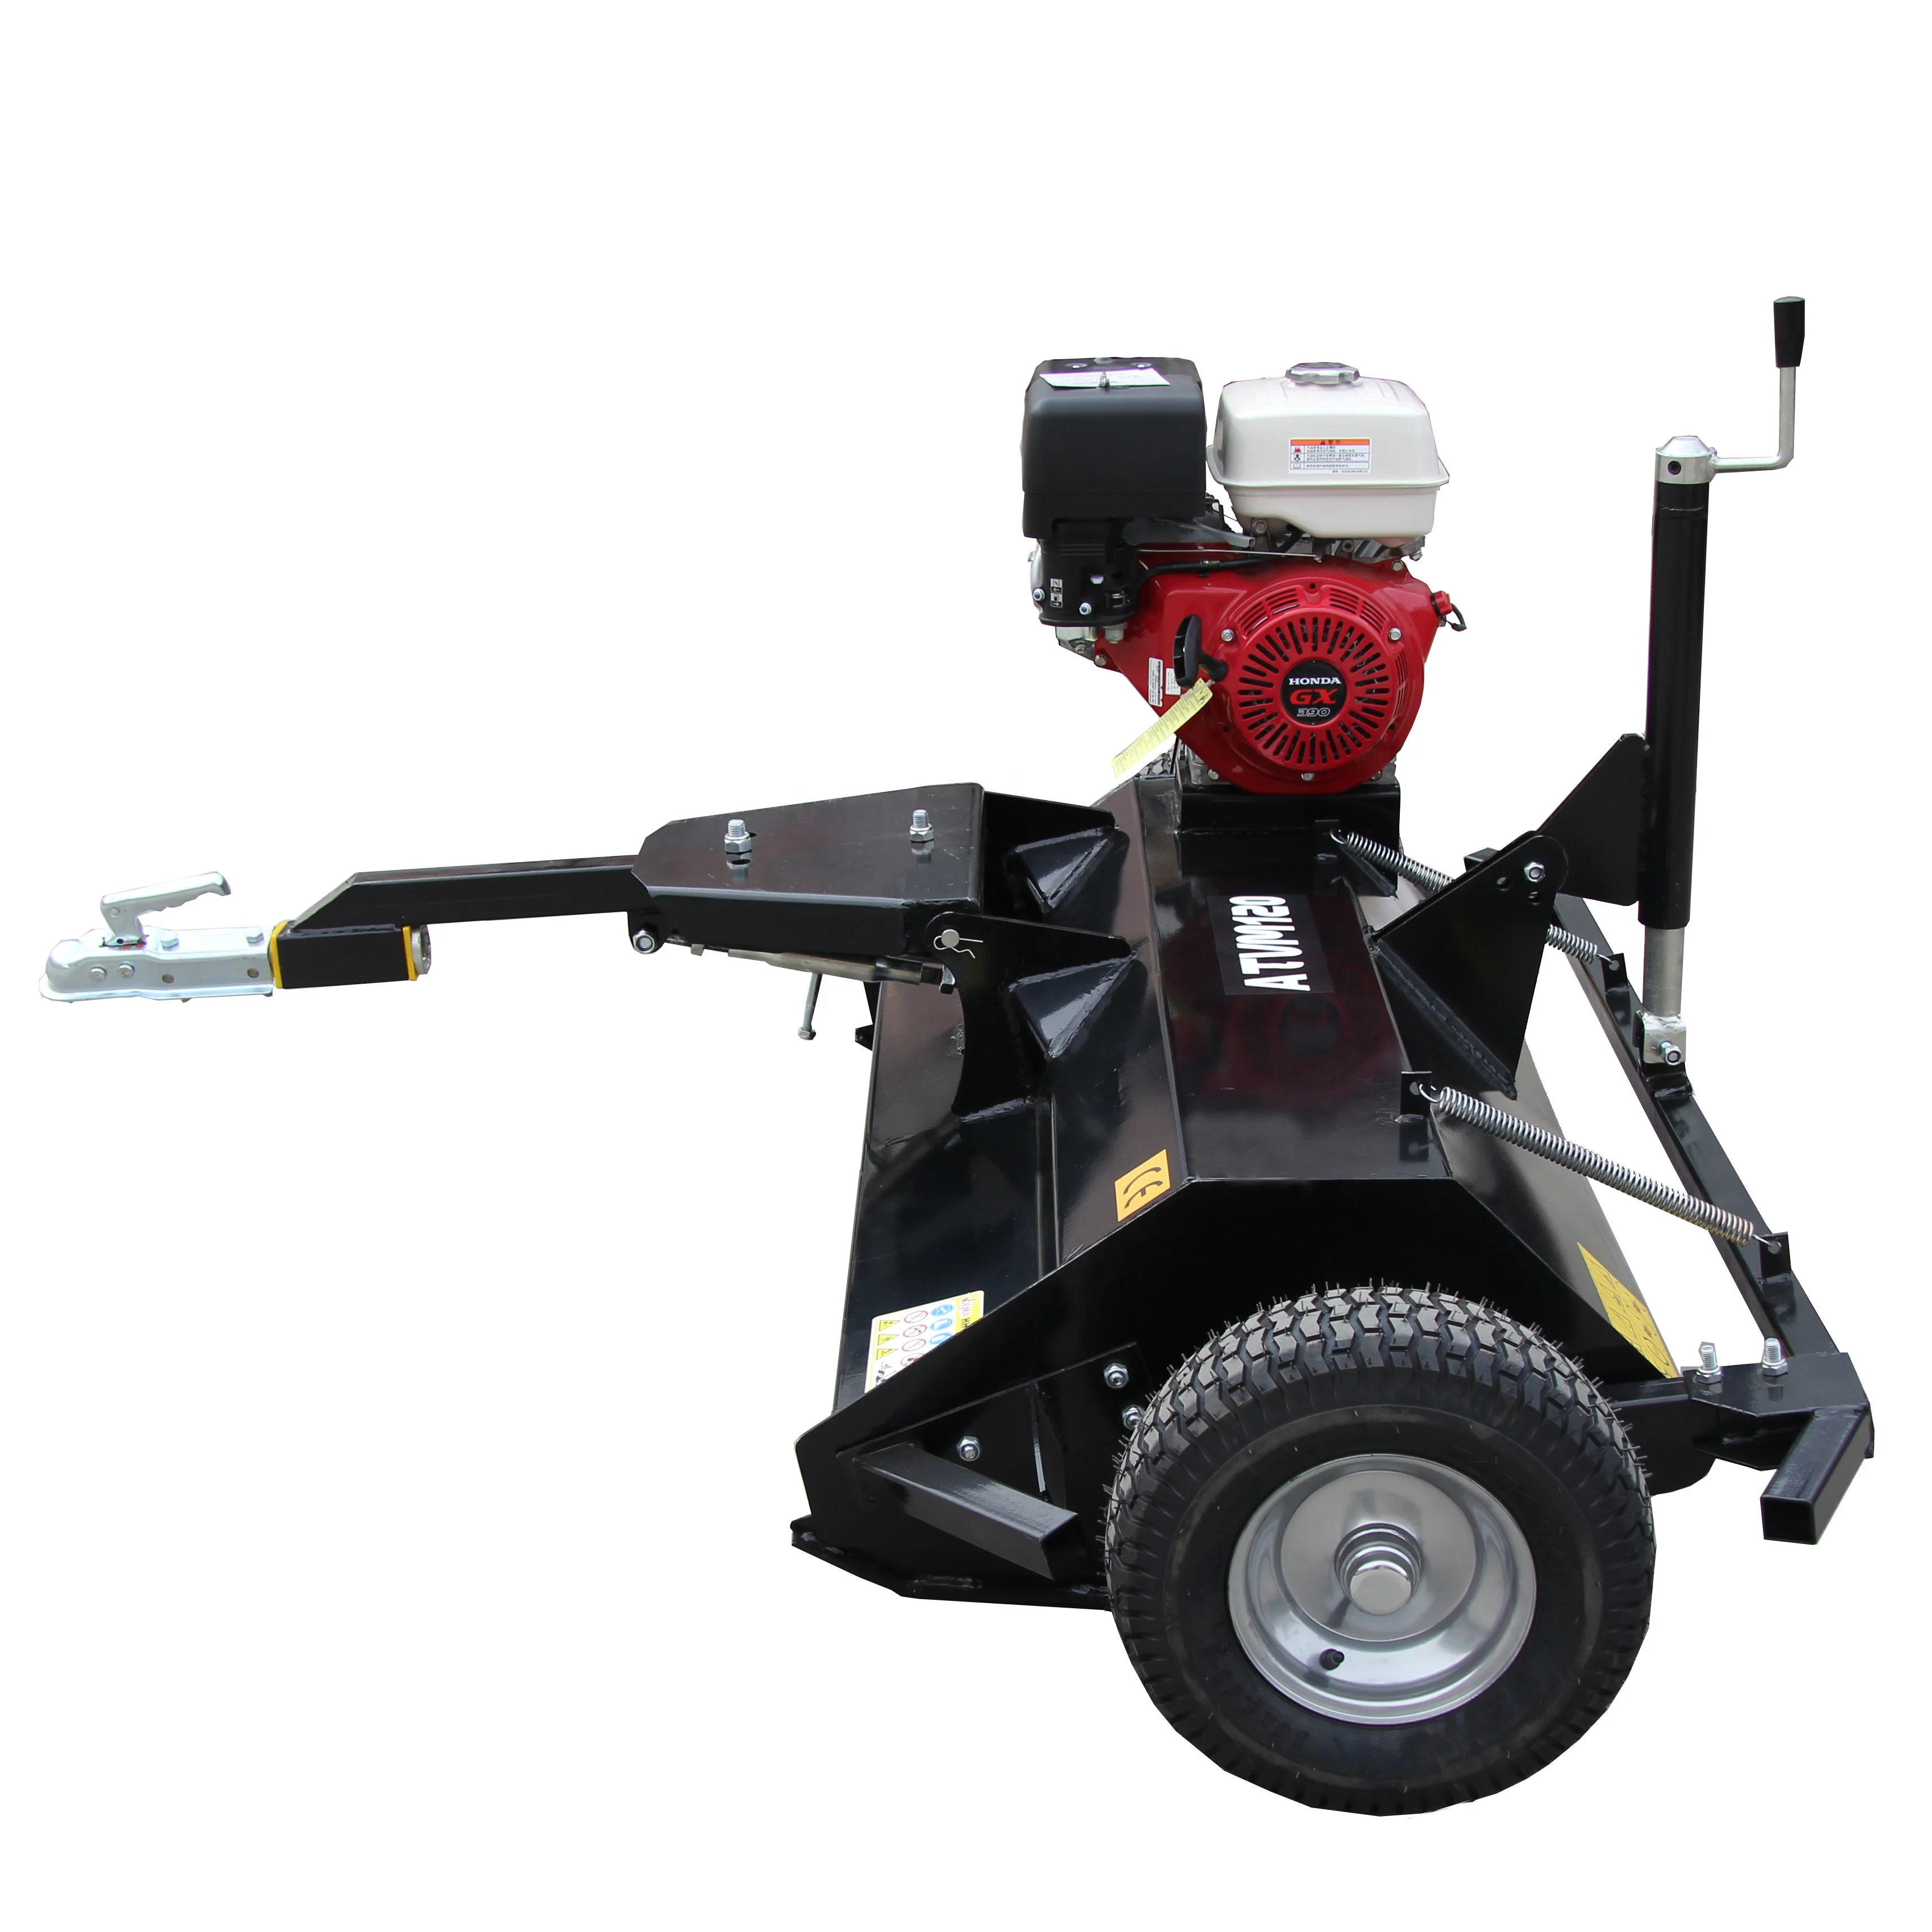 
ATV flail mower with gesoline engine, CE certificate 